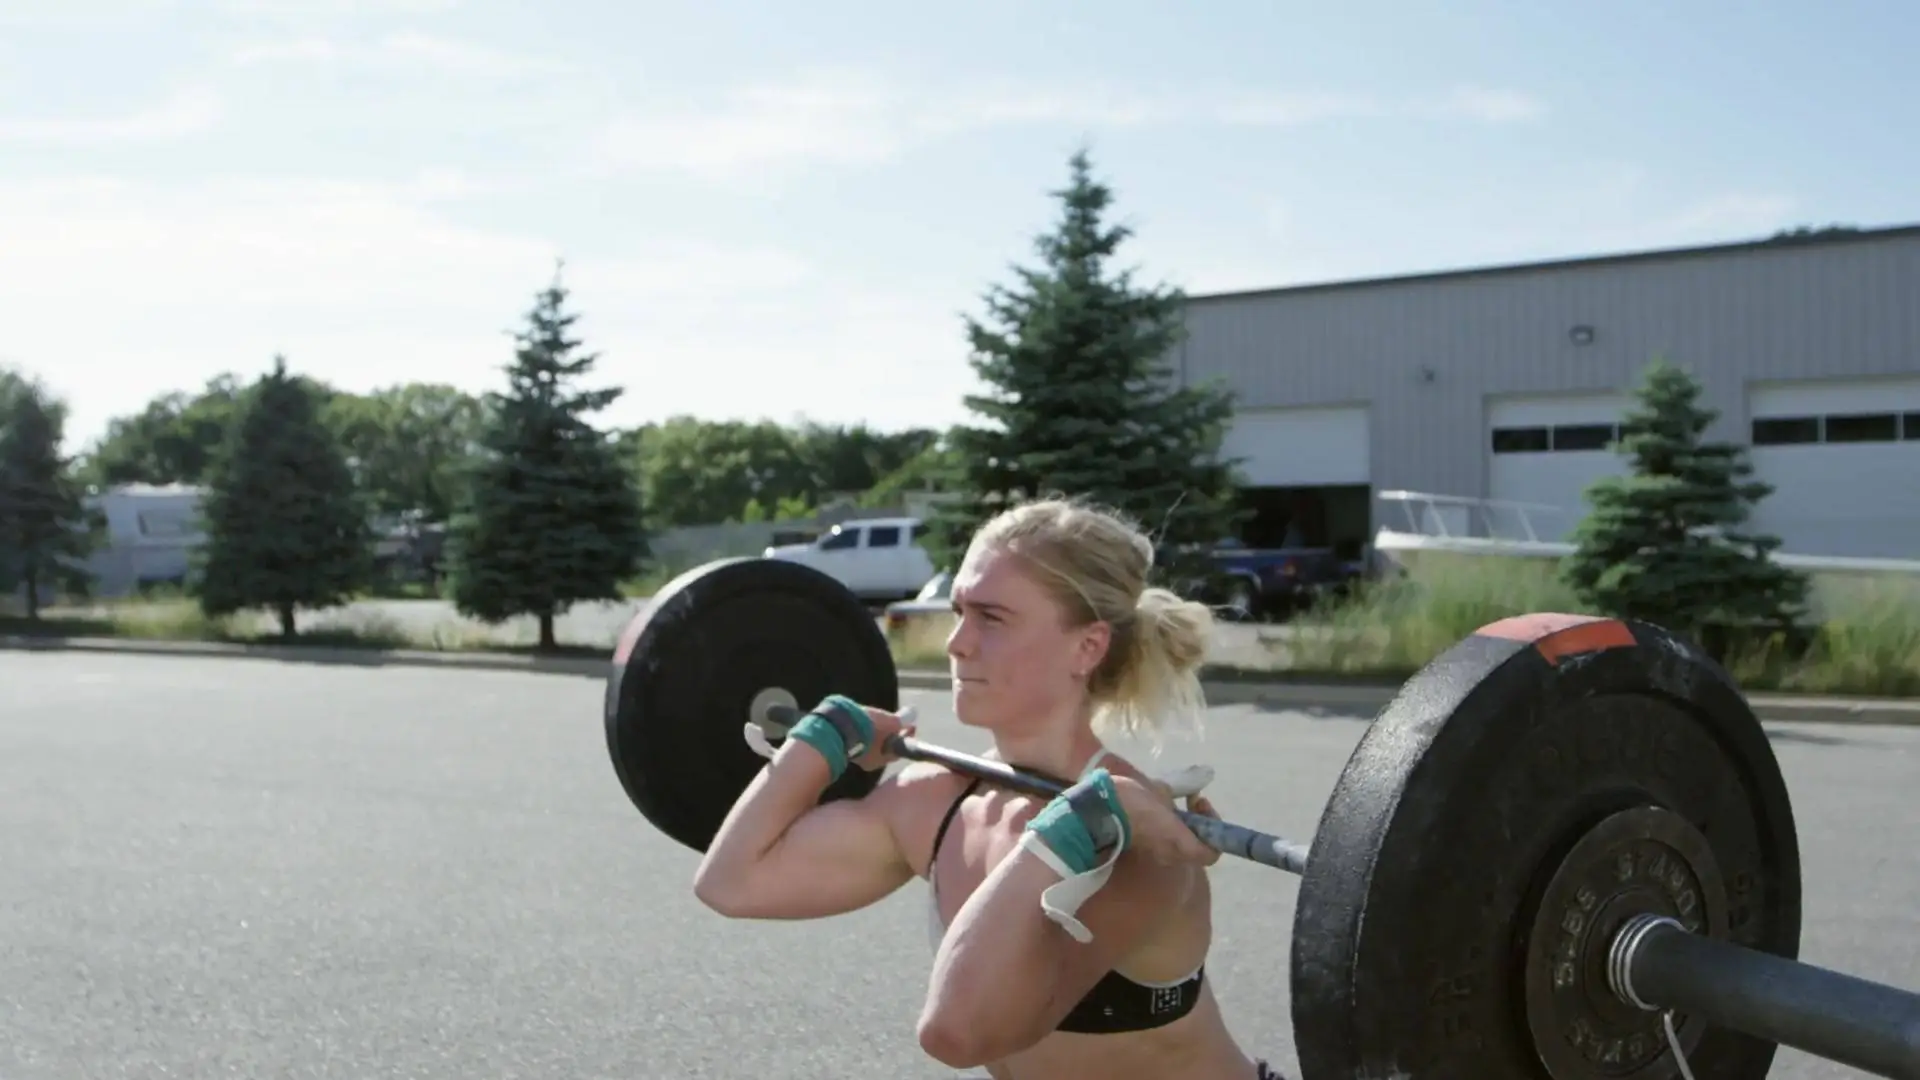 the story of the 2015 reebok crossfit games